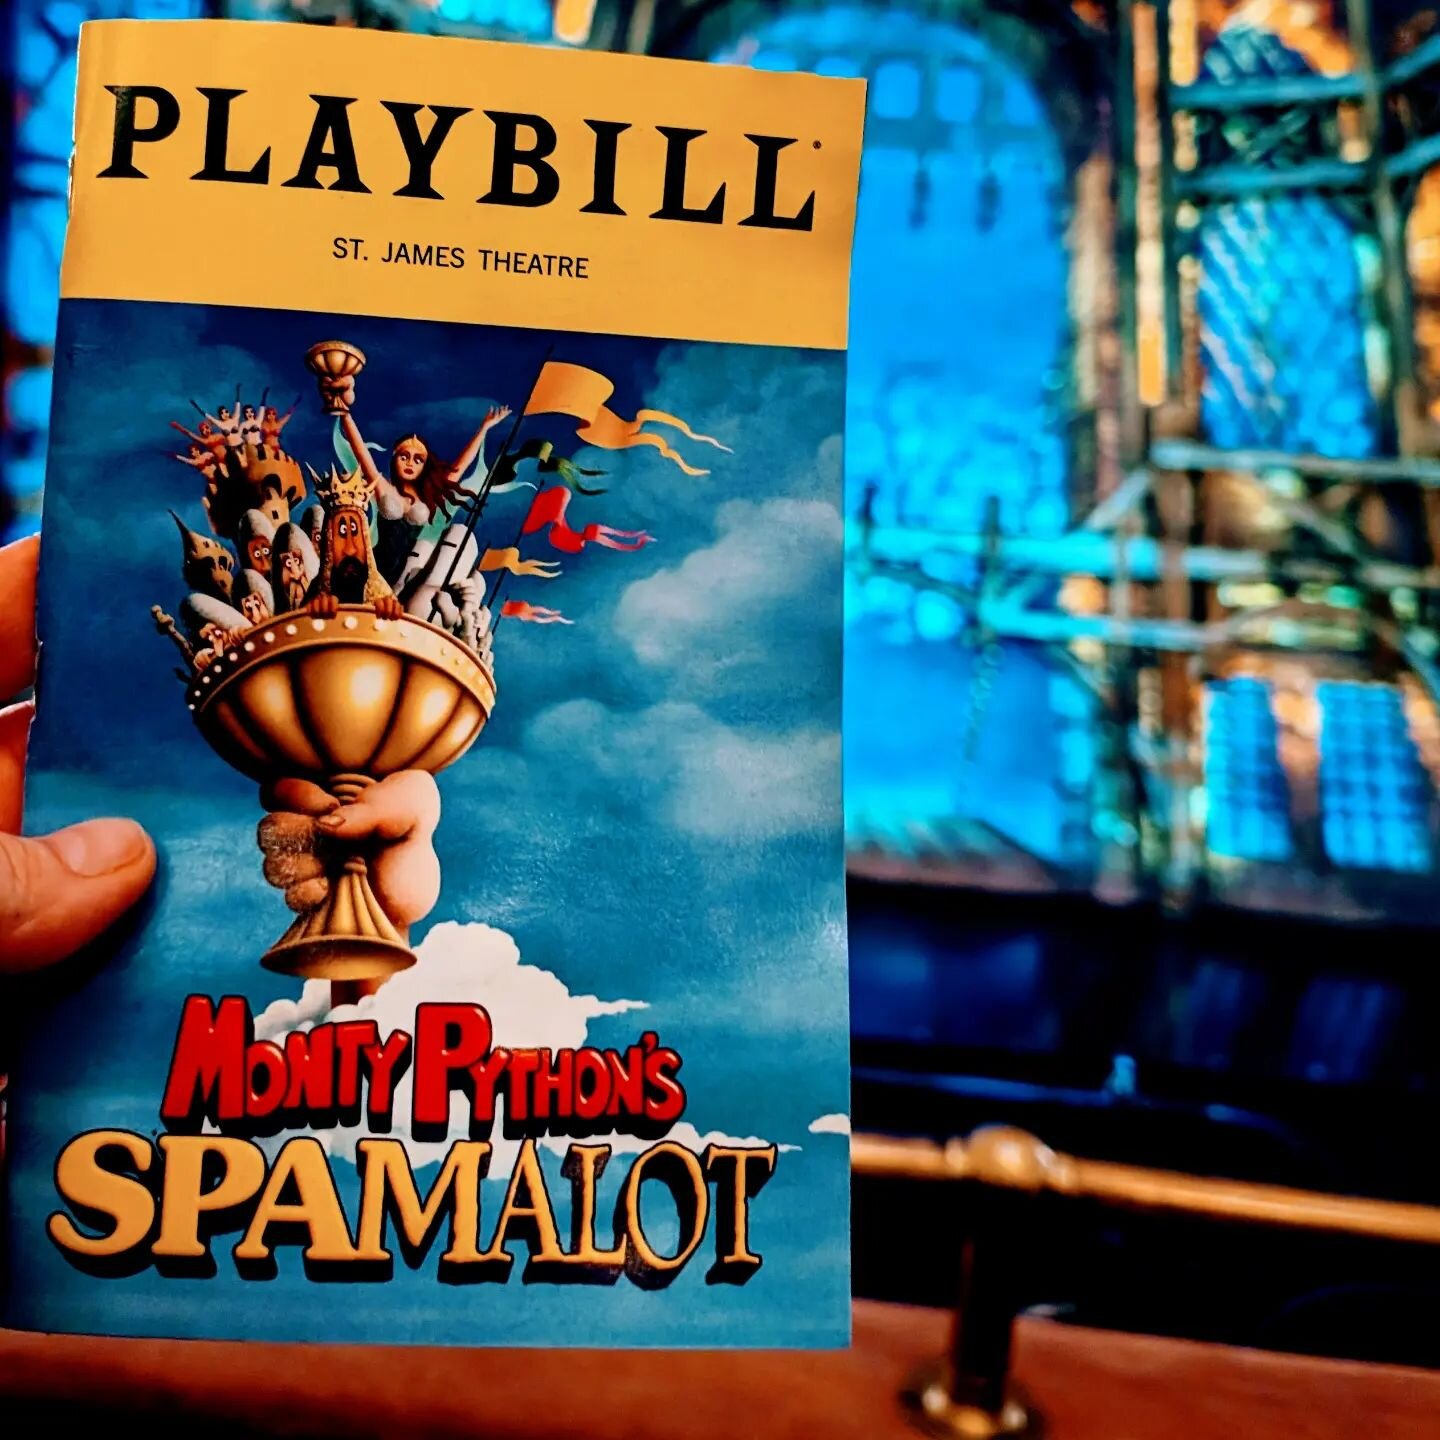 Show #2... It had been forever since I'd seen James Iglehart perform, so I saw Spamalot (which I'd never seen). It was terrific to hear that powerful voice again!